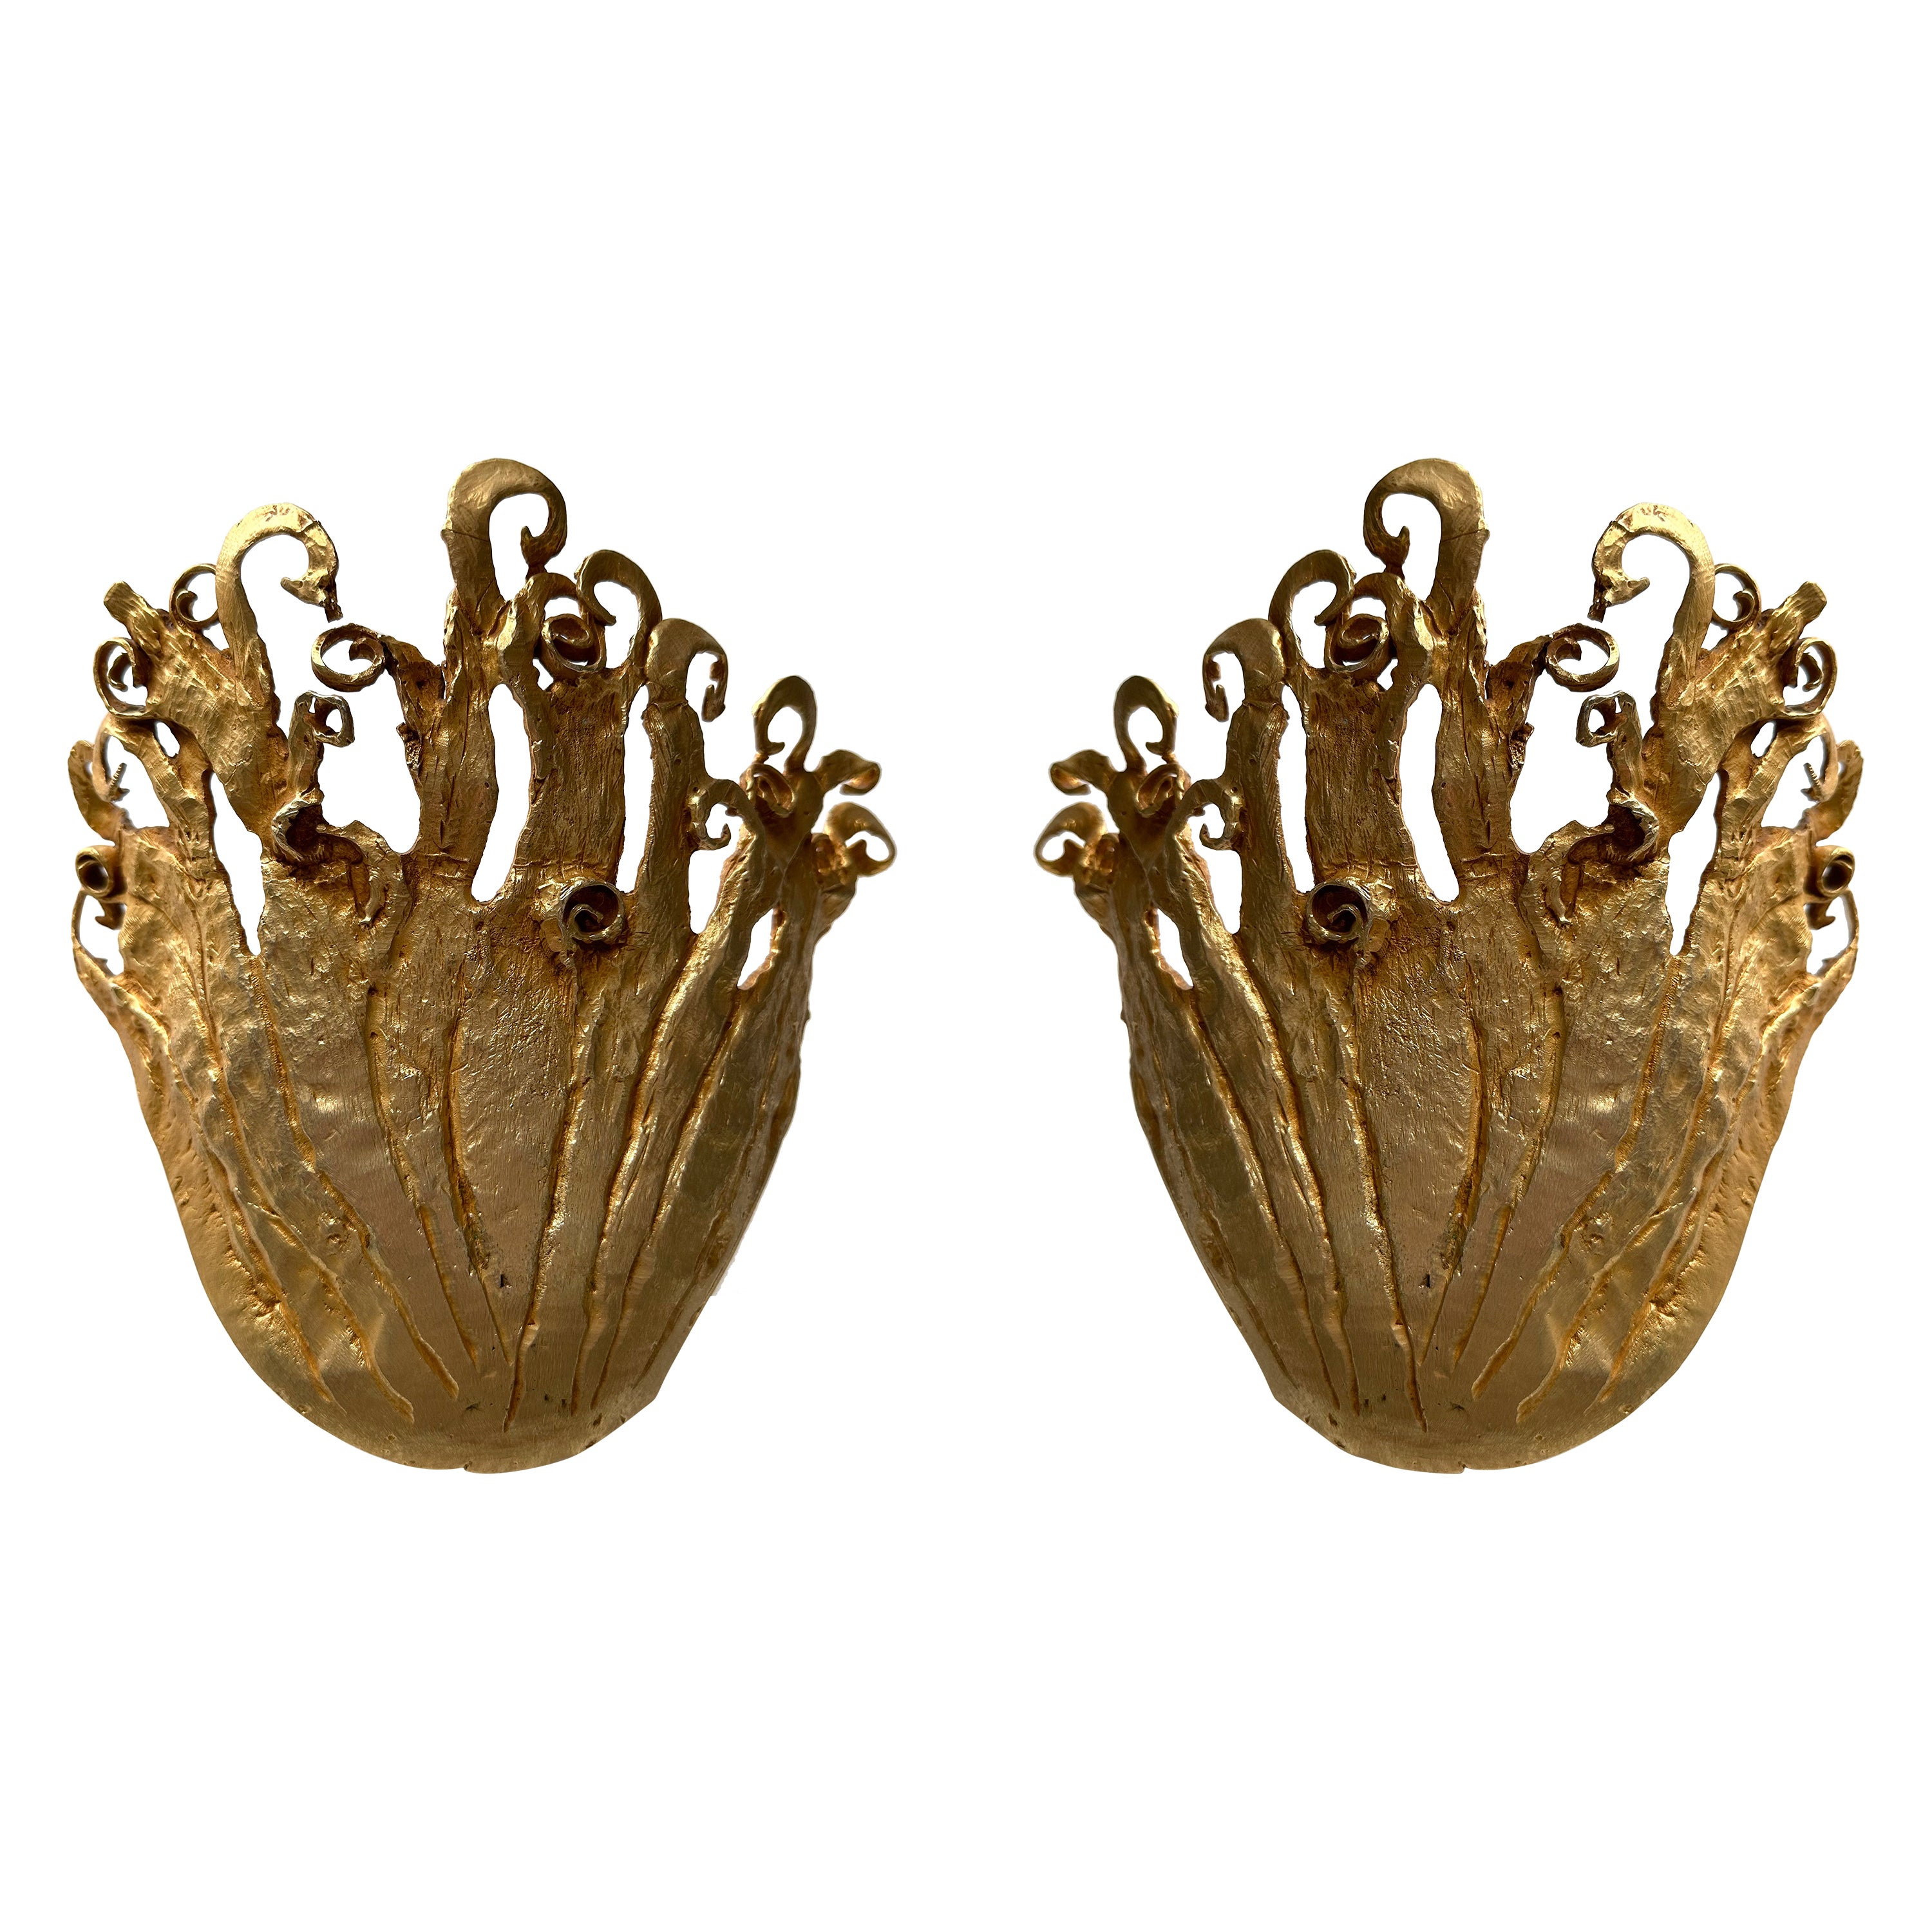 Pair of Gilt Metal Sconces by Fondica, France, 1990s For Sale